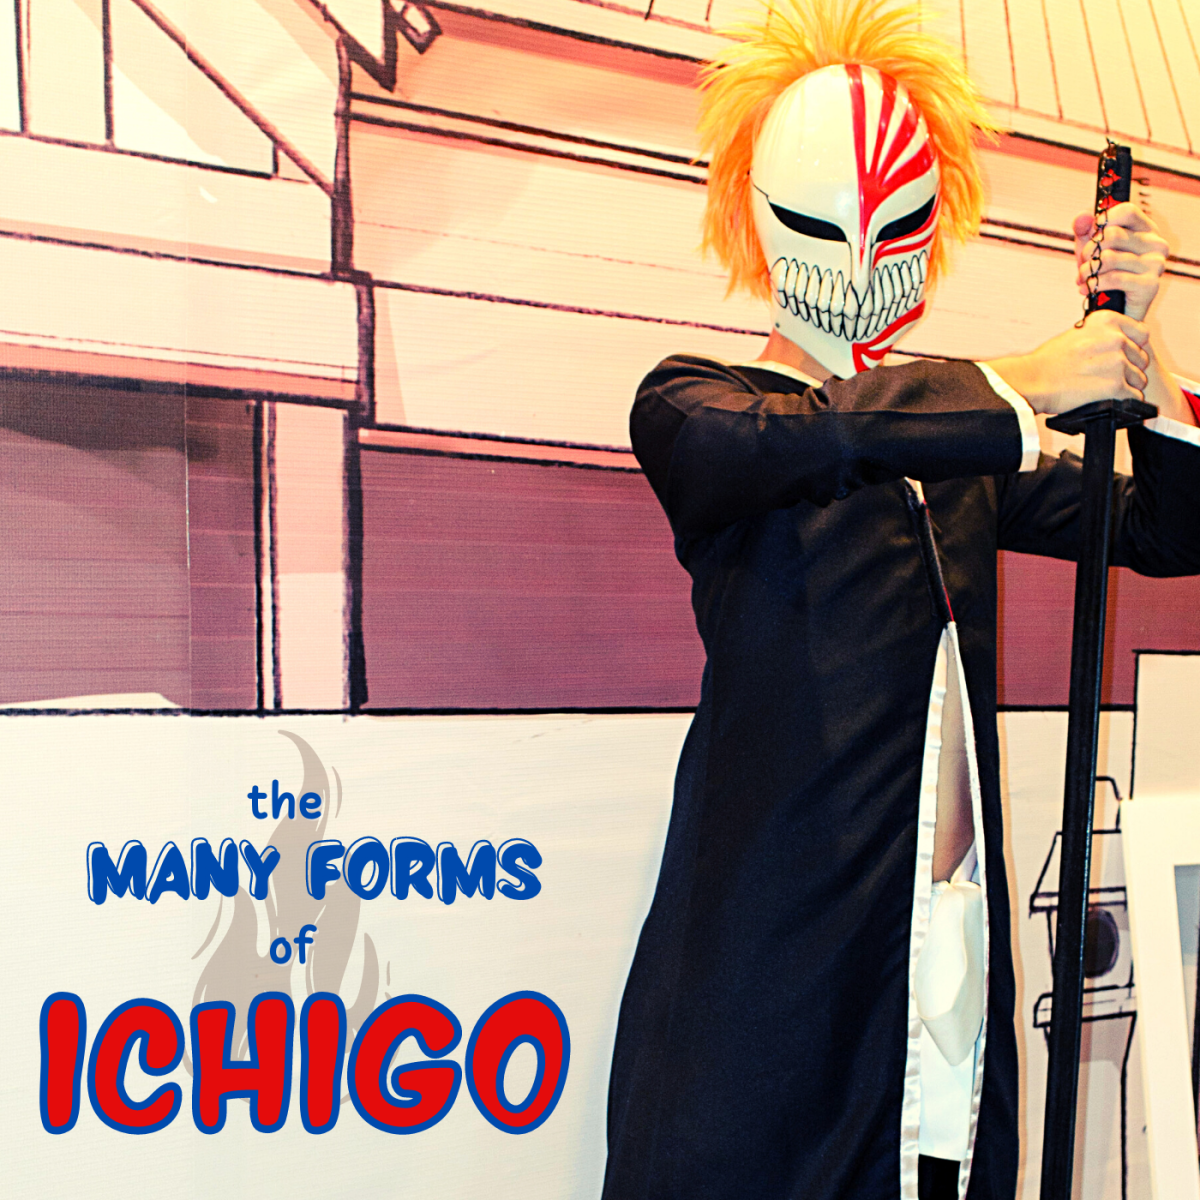 What are all the forms of Ichigo?